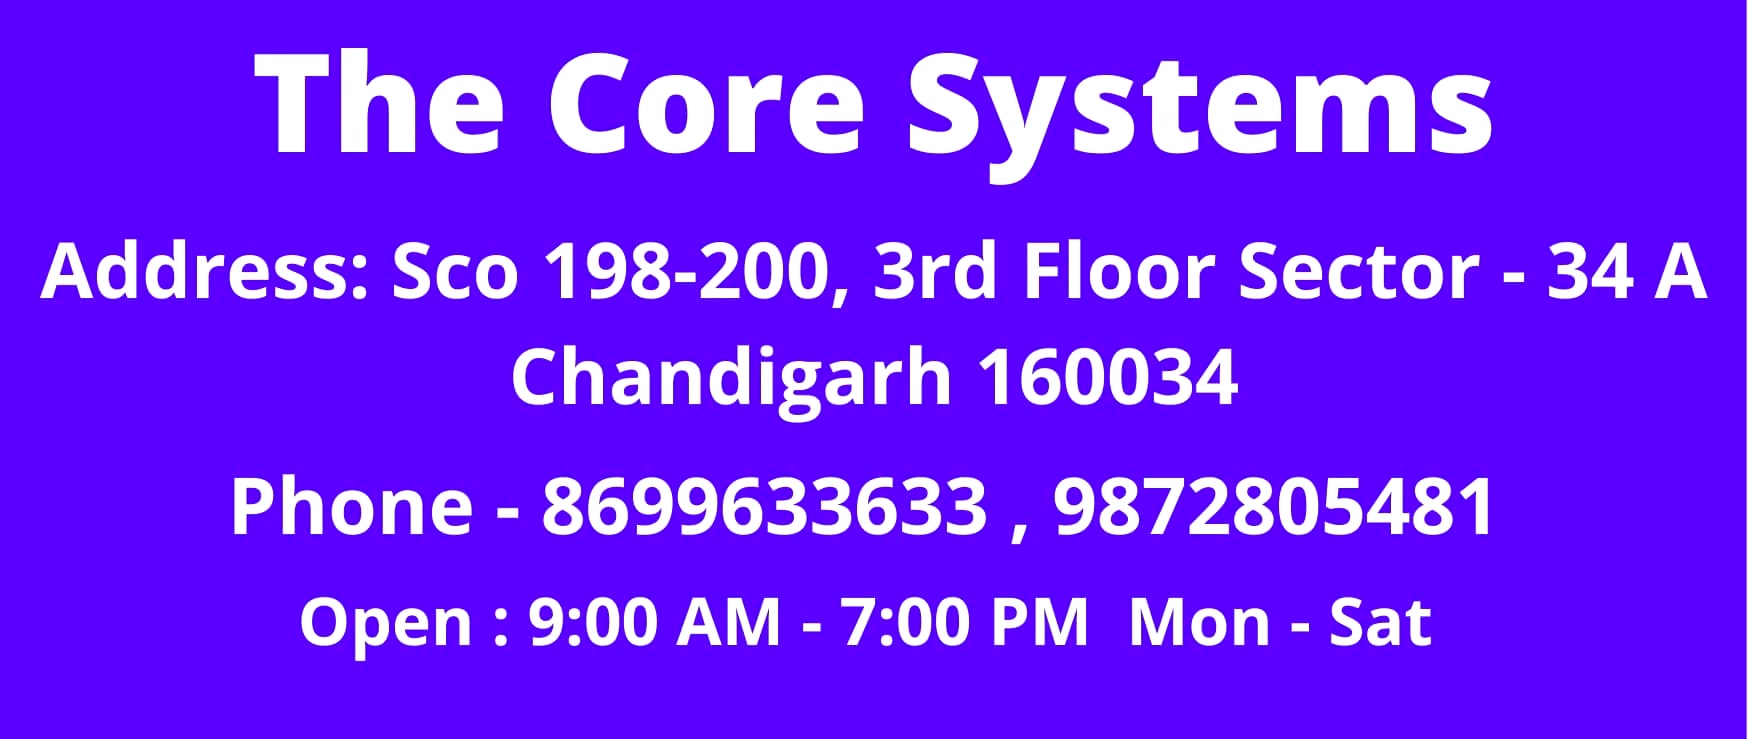 The Core Systems data science training Data Science Training in Chandigarh | The Core Systems 2